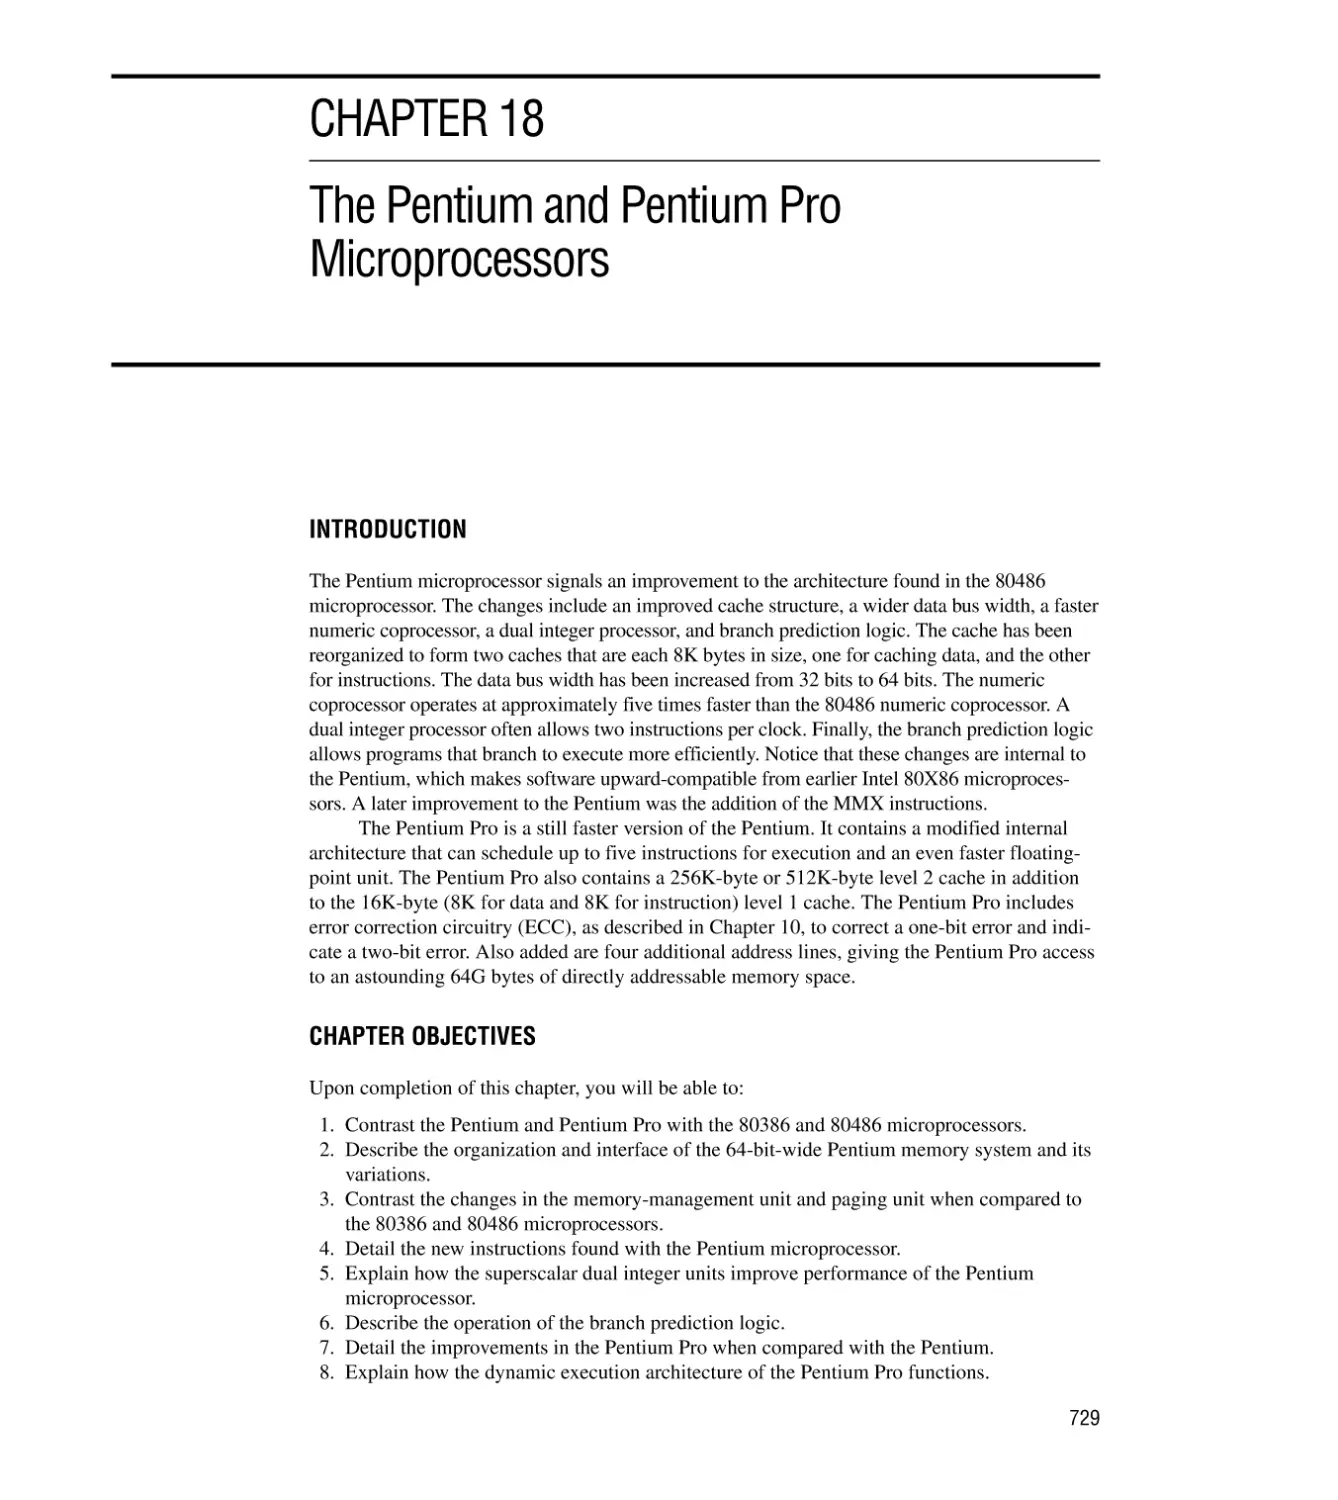 CHAPTER 18 THE PENTIUM AND PENTIUM PRO MICROPROCESSORS
Introduction/Chapter Objectives